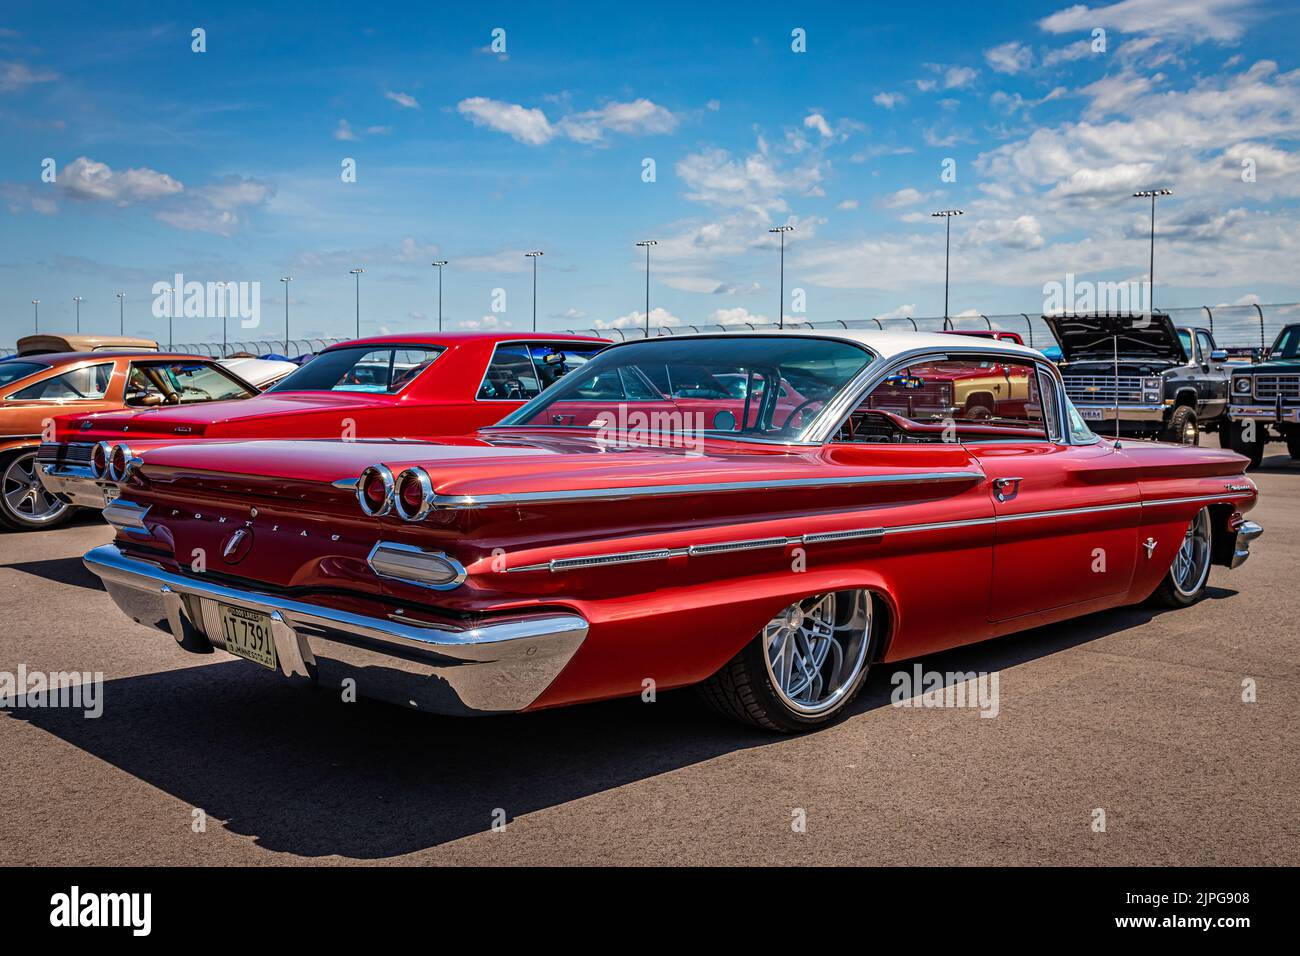 Lebanon, TN - May 13, 2022: Low perspective rear corner view of a 1960 Pontiac Parisienne Hardtop Coupe at a local car show. Stock Photo